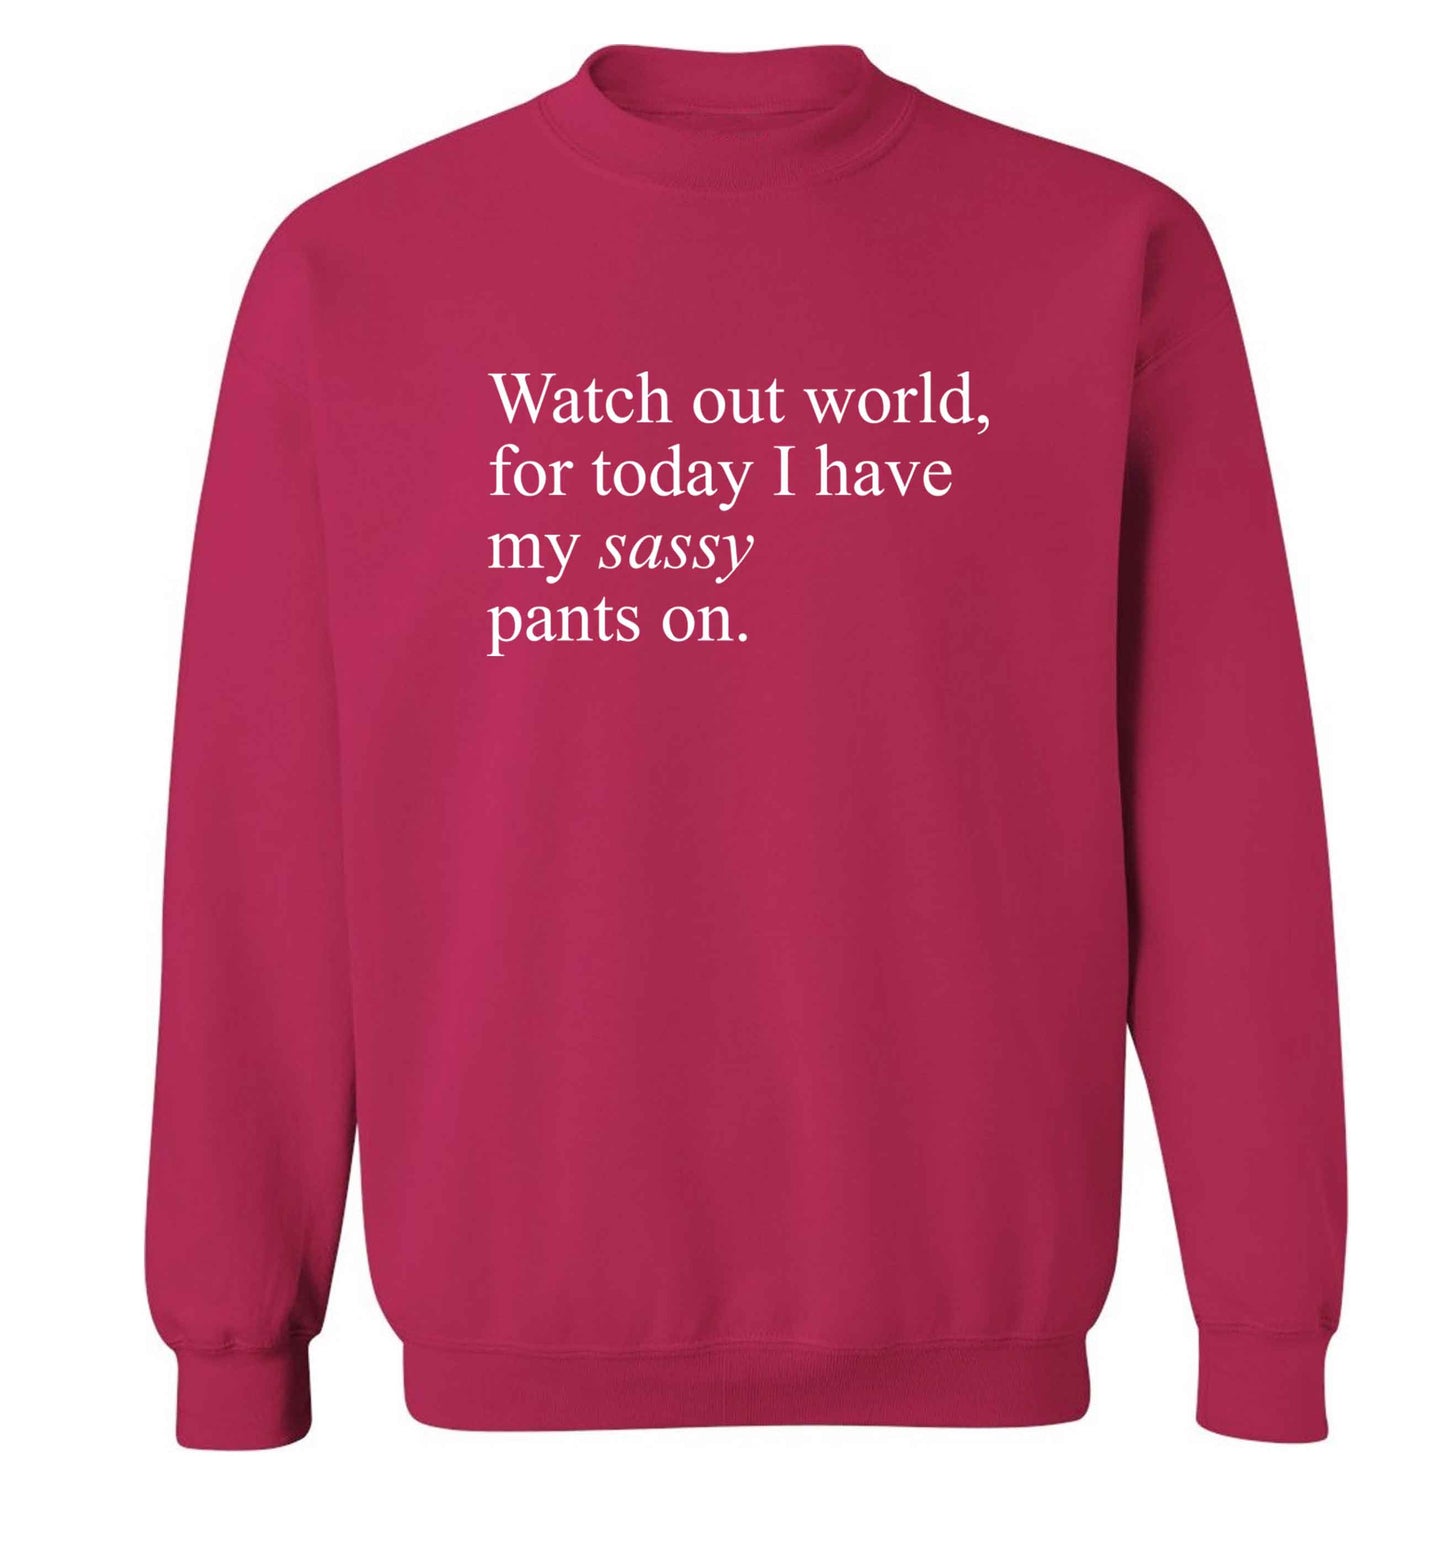 Watch out world for today I have my sassy pants on adult's unisex pink sweater 2XL